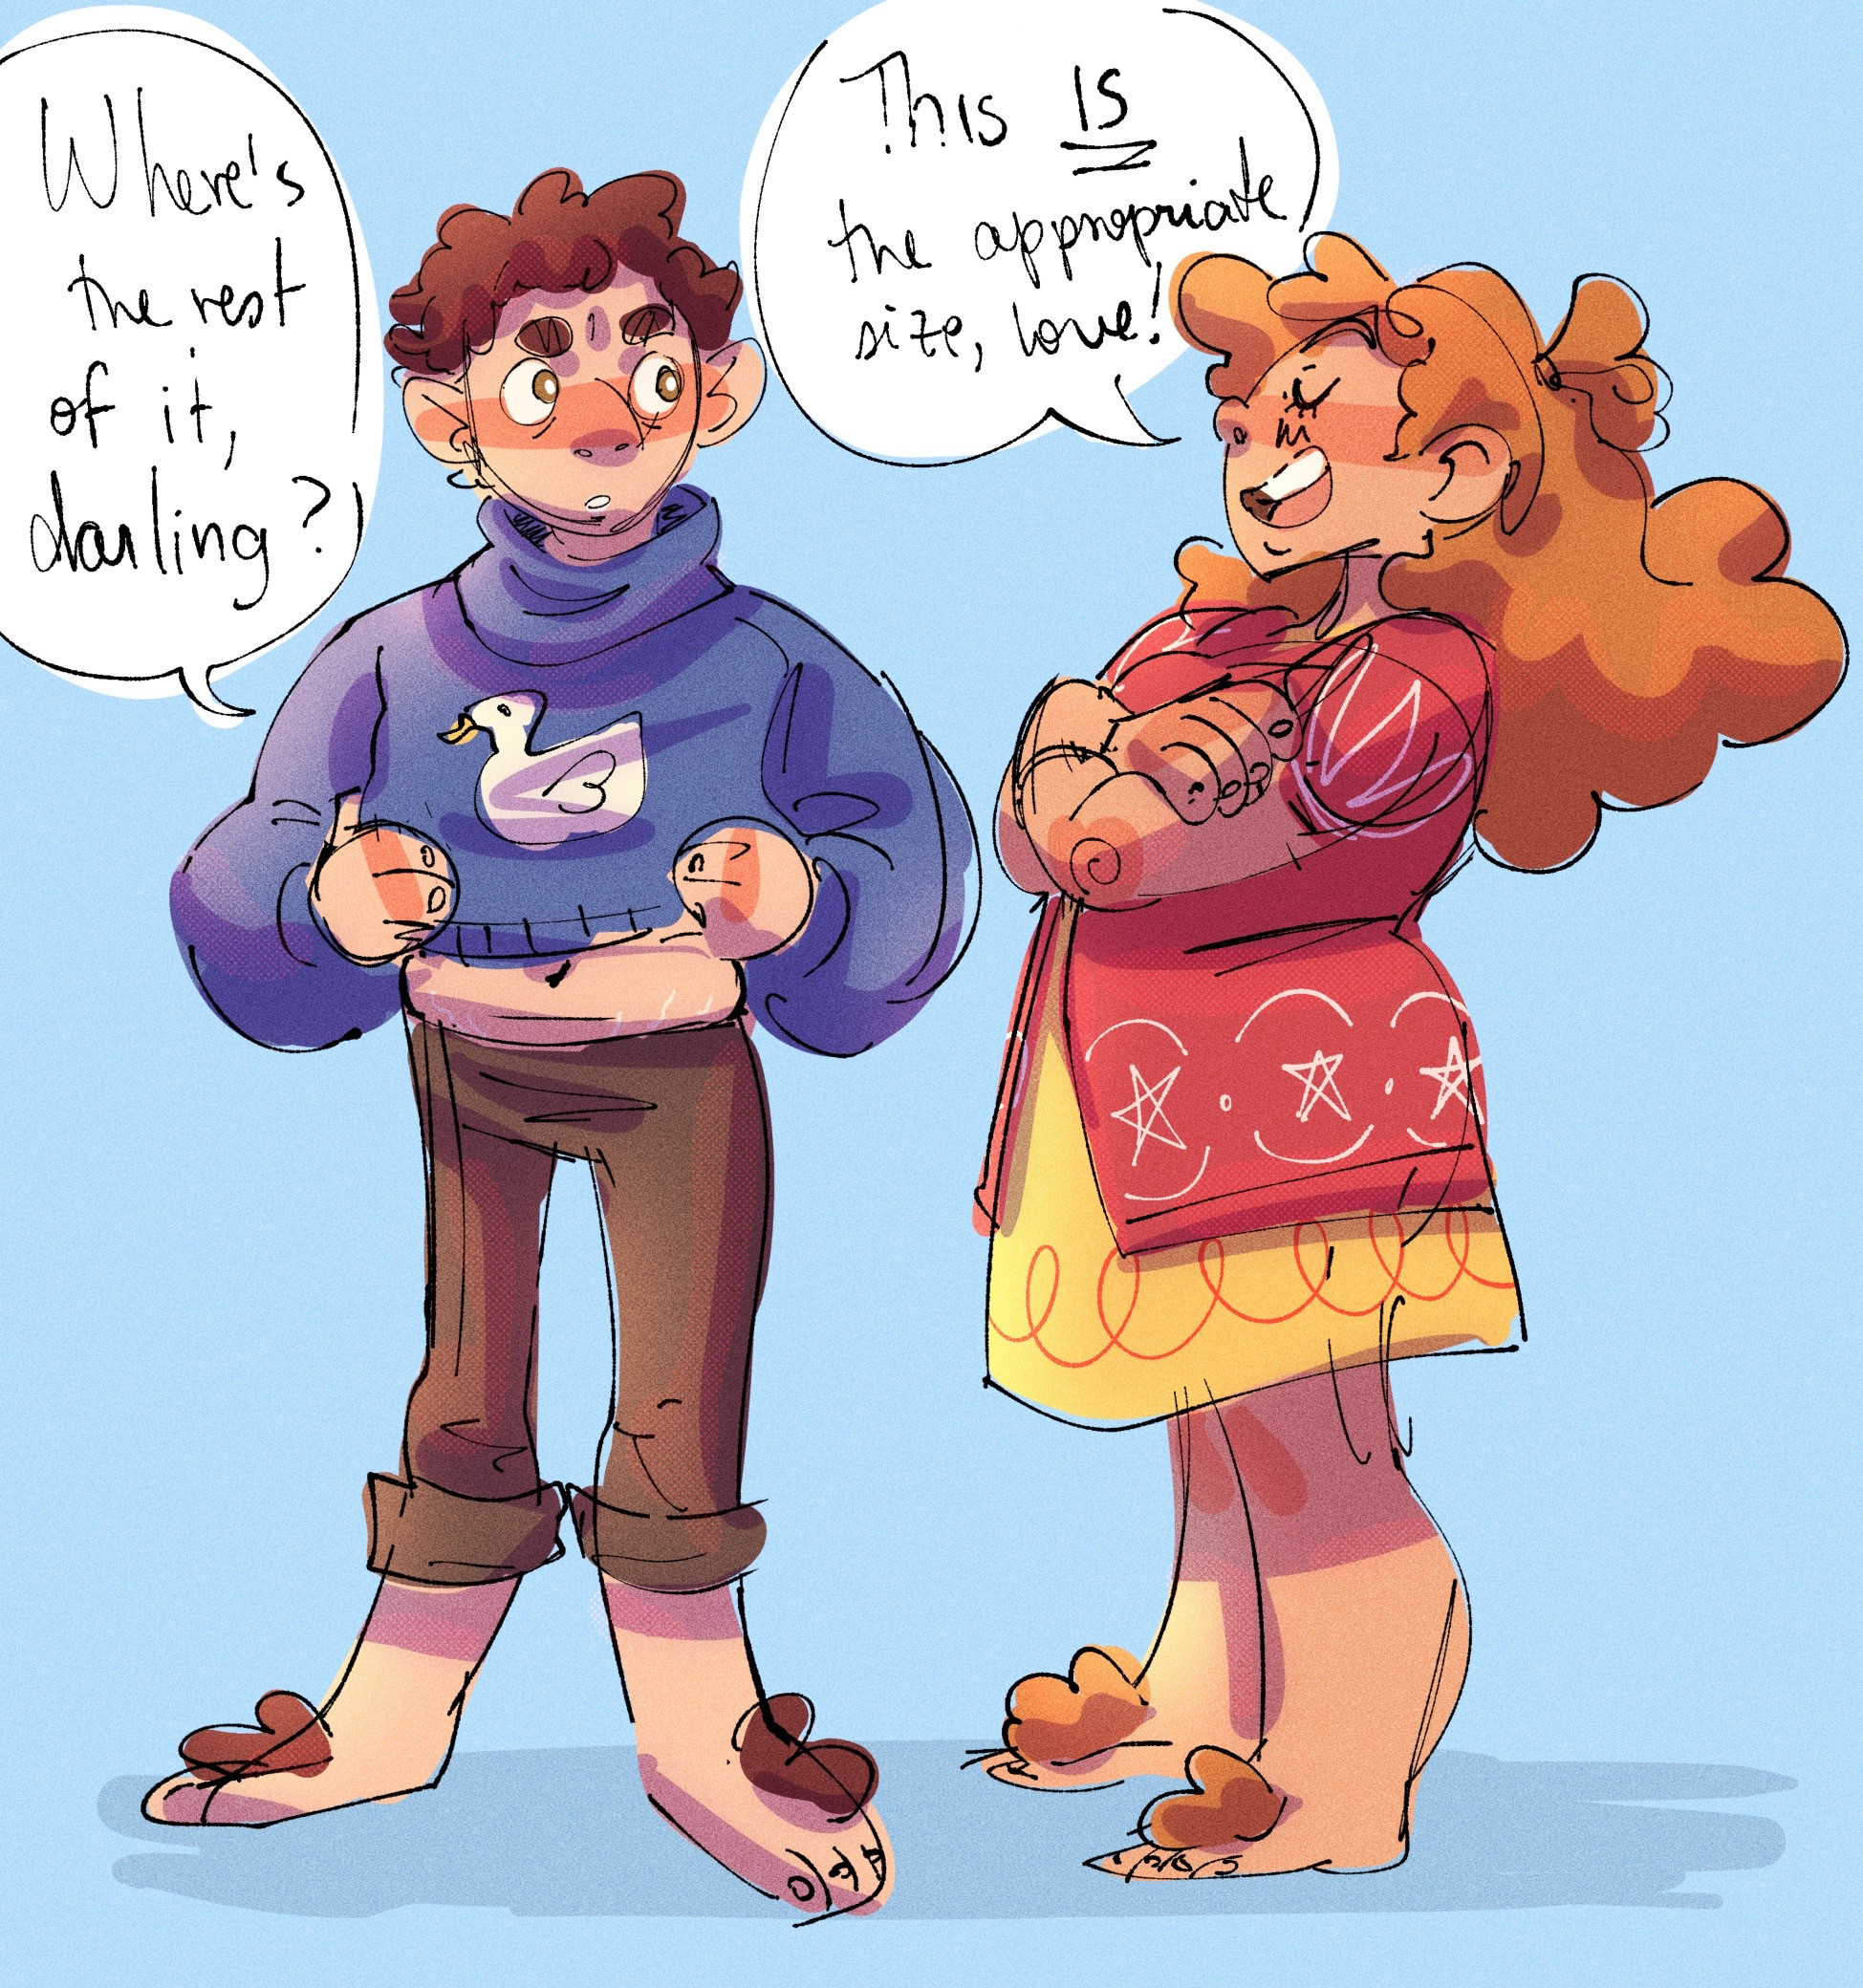 I thought it would be funny for her to be making "modern" clothes for her hobbit family (like a crop top)